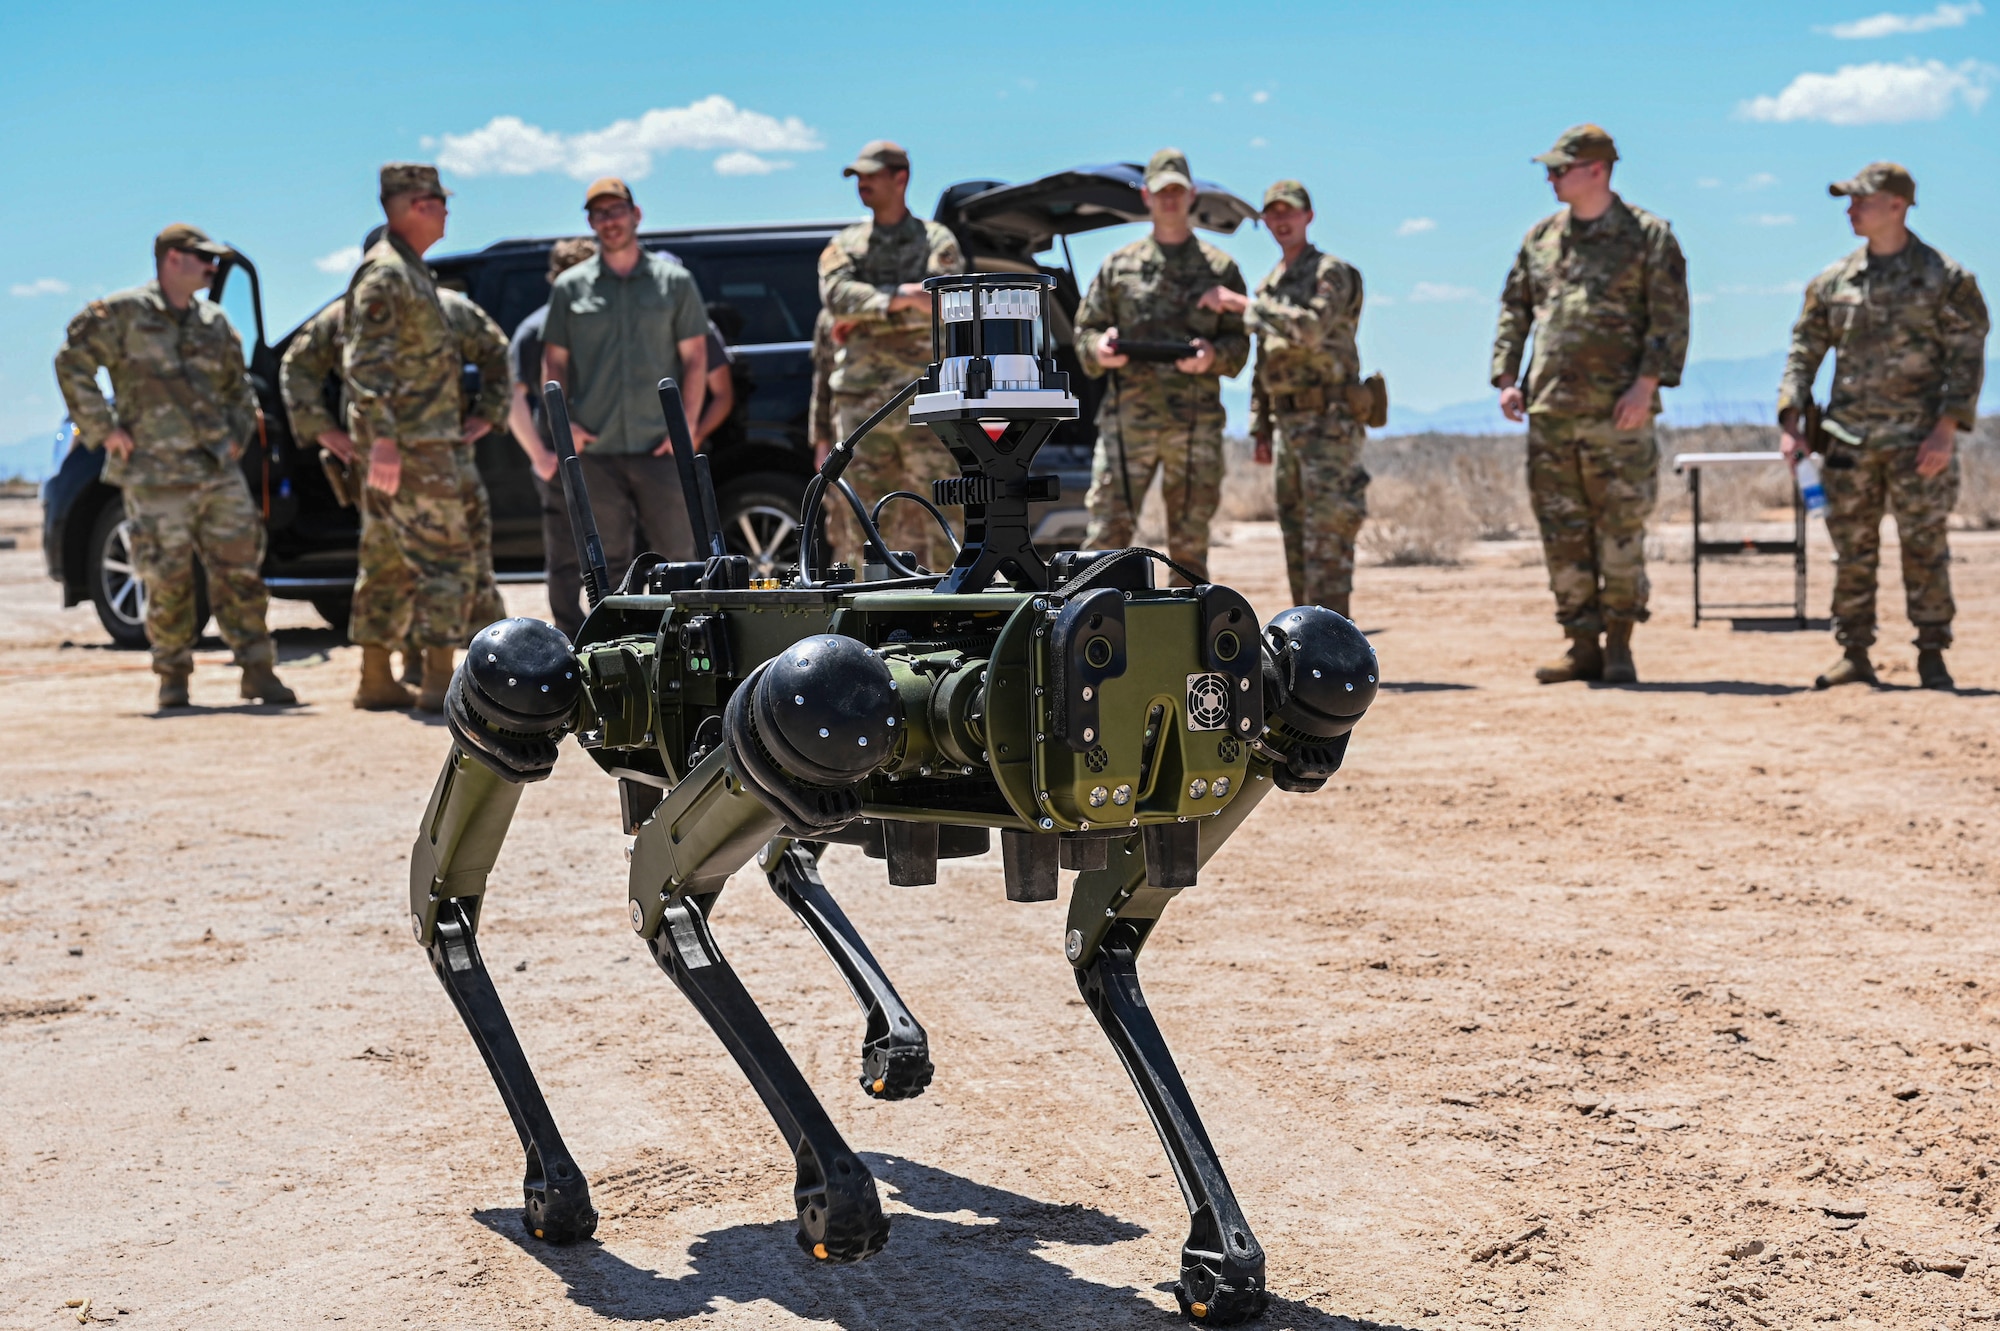 Members and leadership from the 49th Wing and 49th Security Forces Squadron watch a demonstration of a Vision 60 Q-UGV ground robot in action at Holloman Air Force Base, New Mexico, April 17, 2023. The Vision 60 is capable of withstanding various environmental challenges making it the perfect tool for all-weather operations taking place on base. (U.S. Air Force photo by Airman 1st Class Isaiah Pedrazzini)